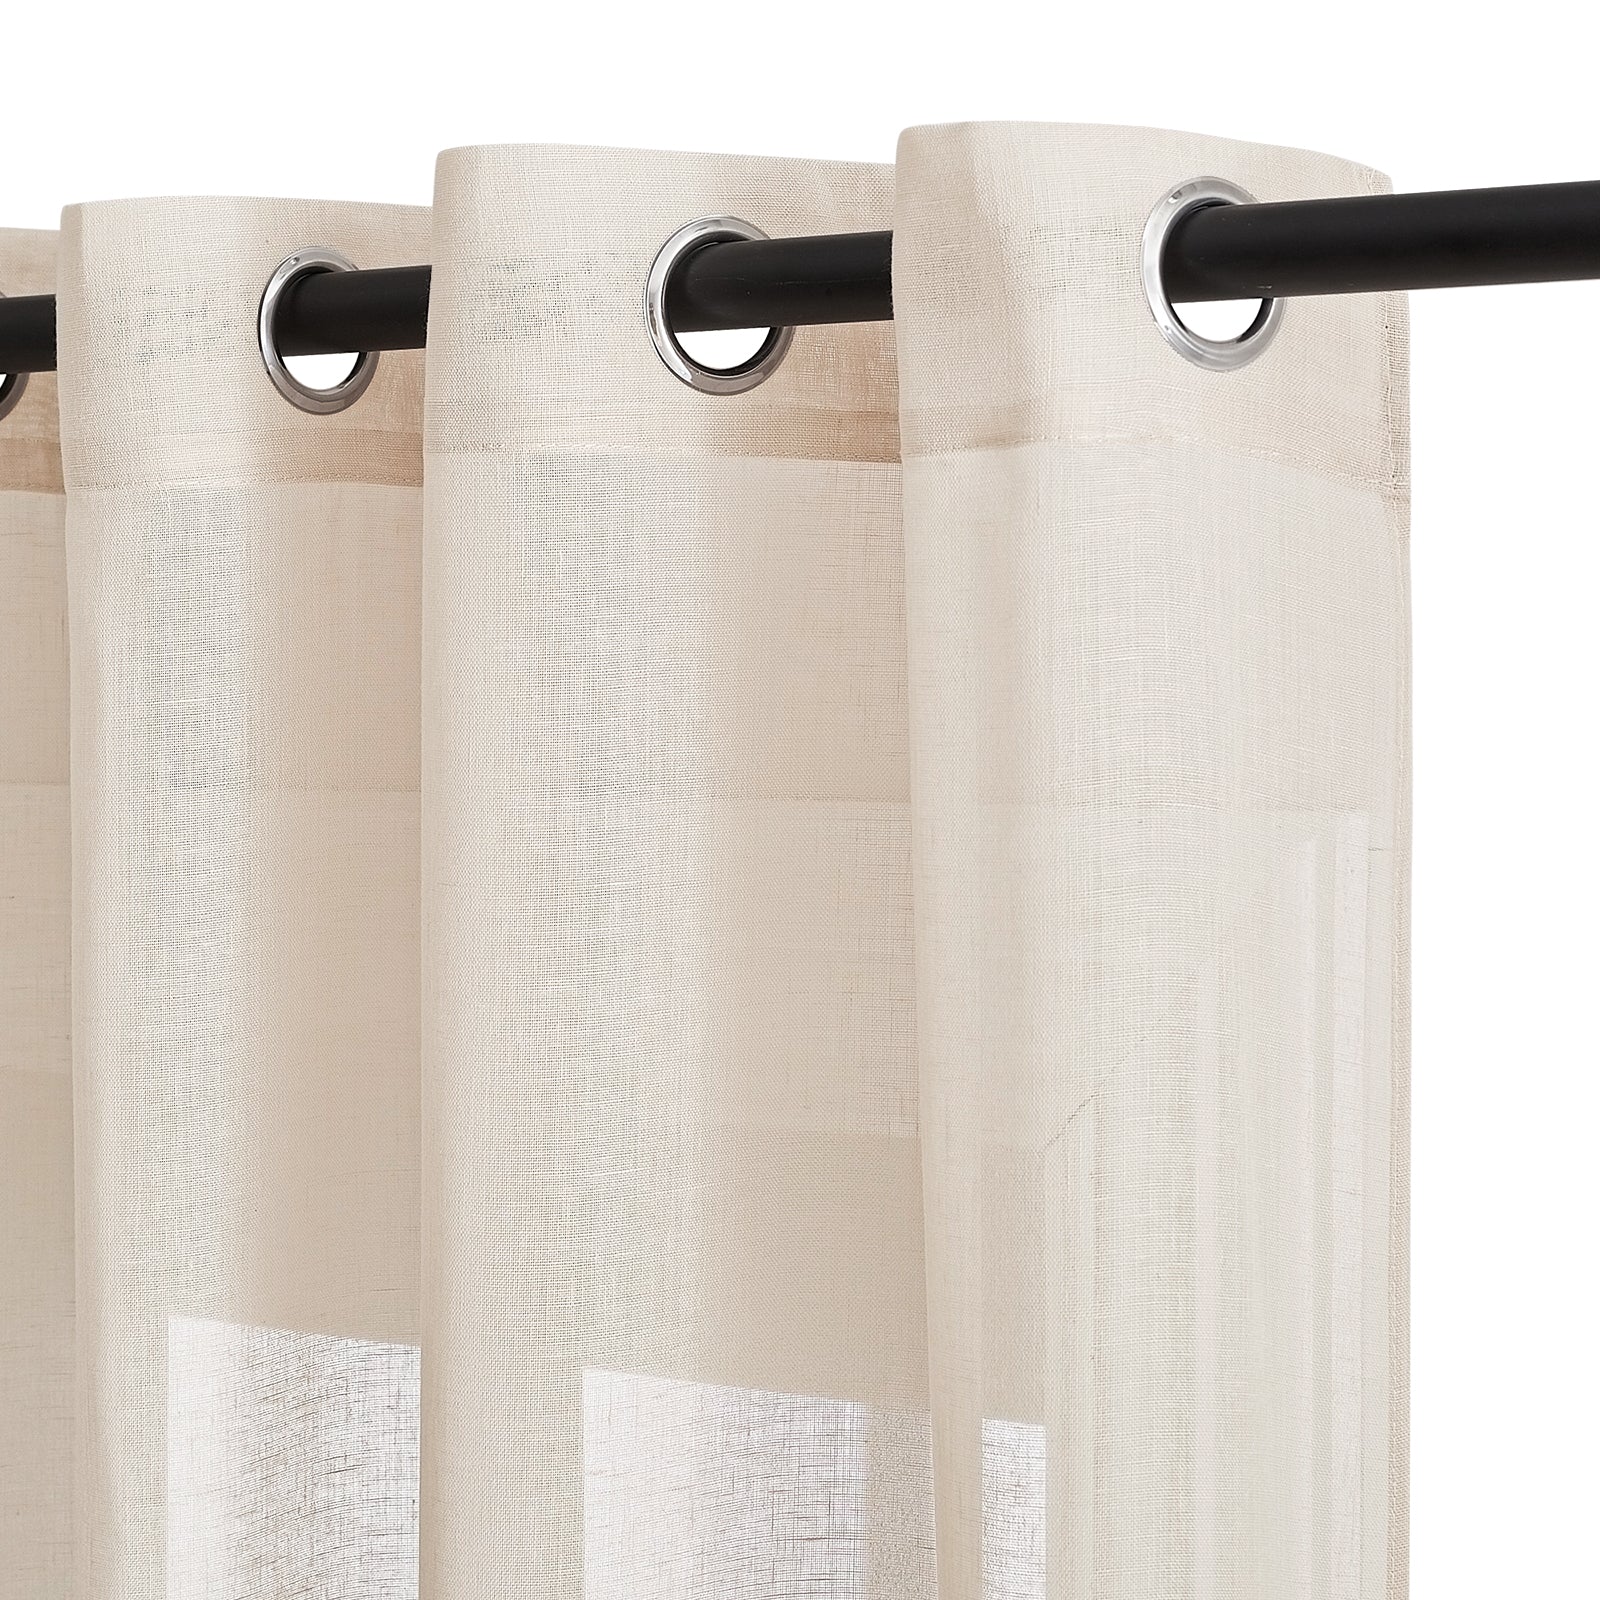 Grommet Sheer Privacy Linen Curtains For Bedroom (Width: 70 Inch) 2 Panels KGORGE Store